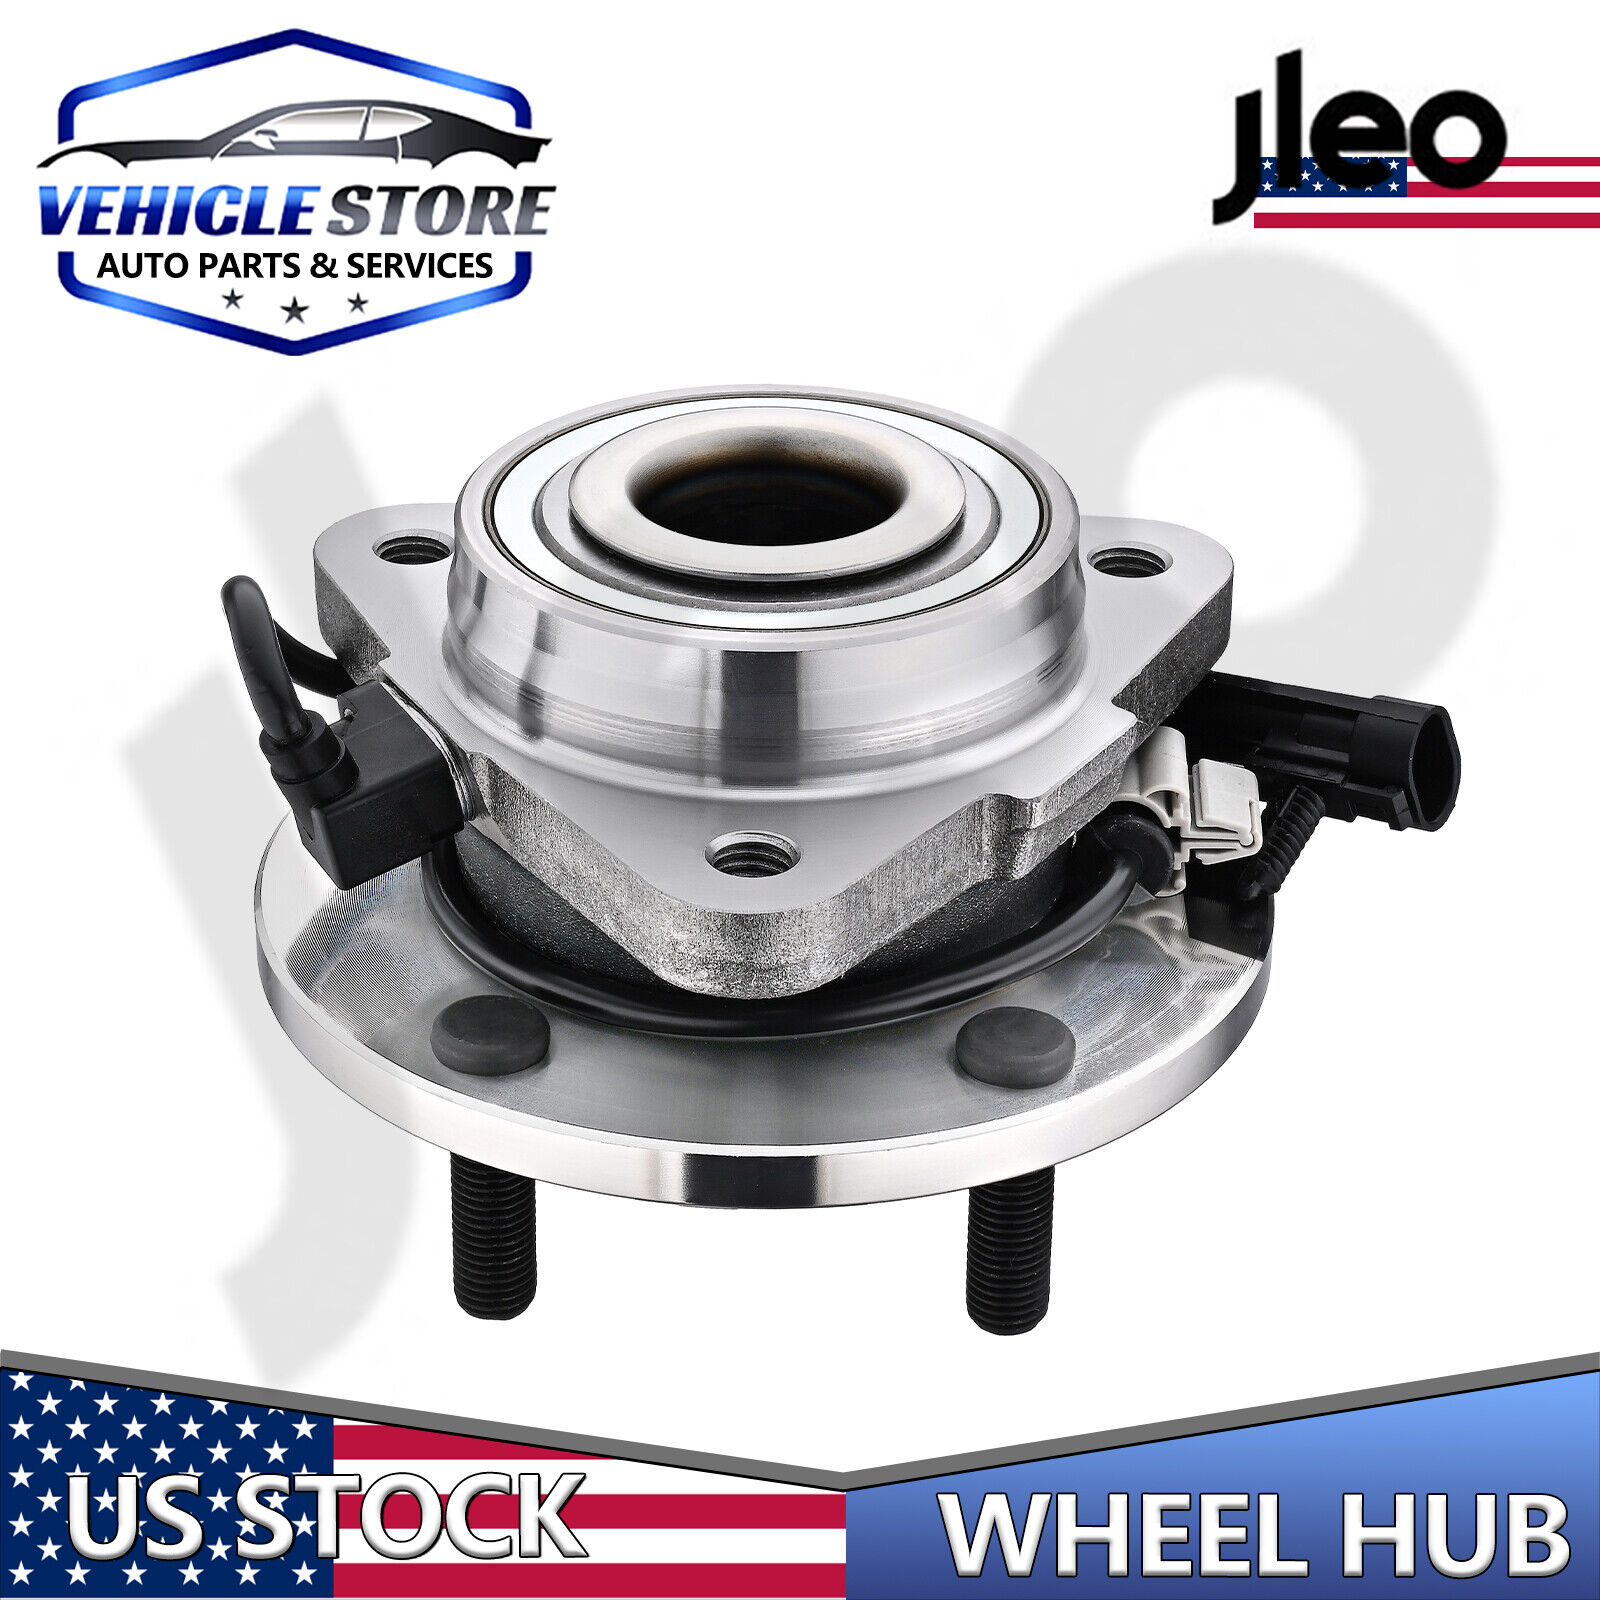 2WD FRONT Wheel Bearing Hub Assembly for 1998 1999 - 2004 Chevy Blazer GMC Jimmy